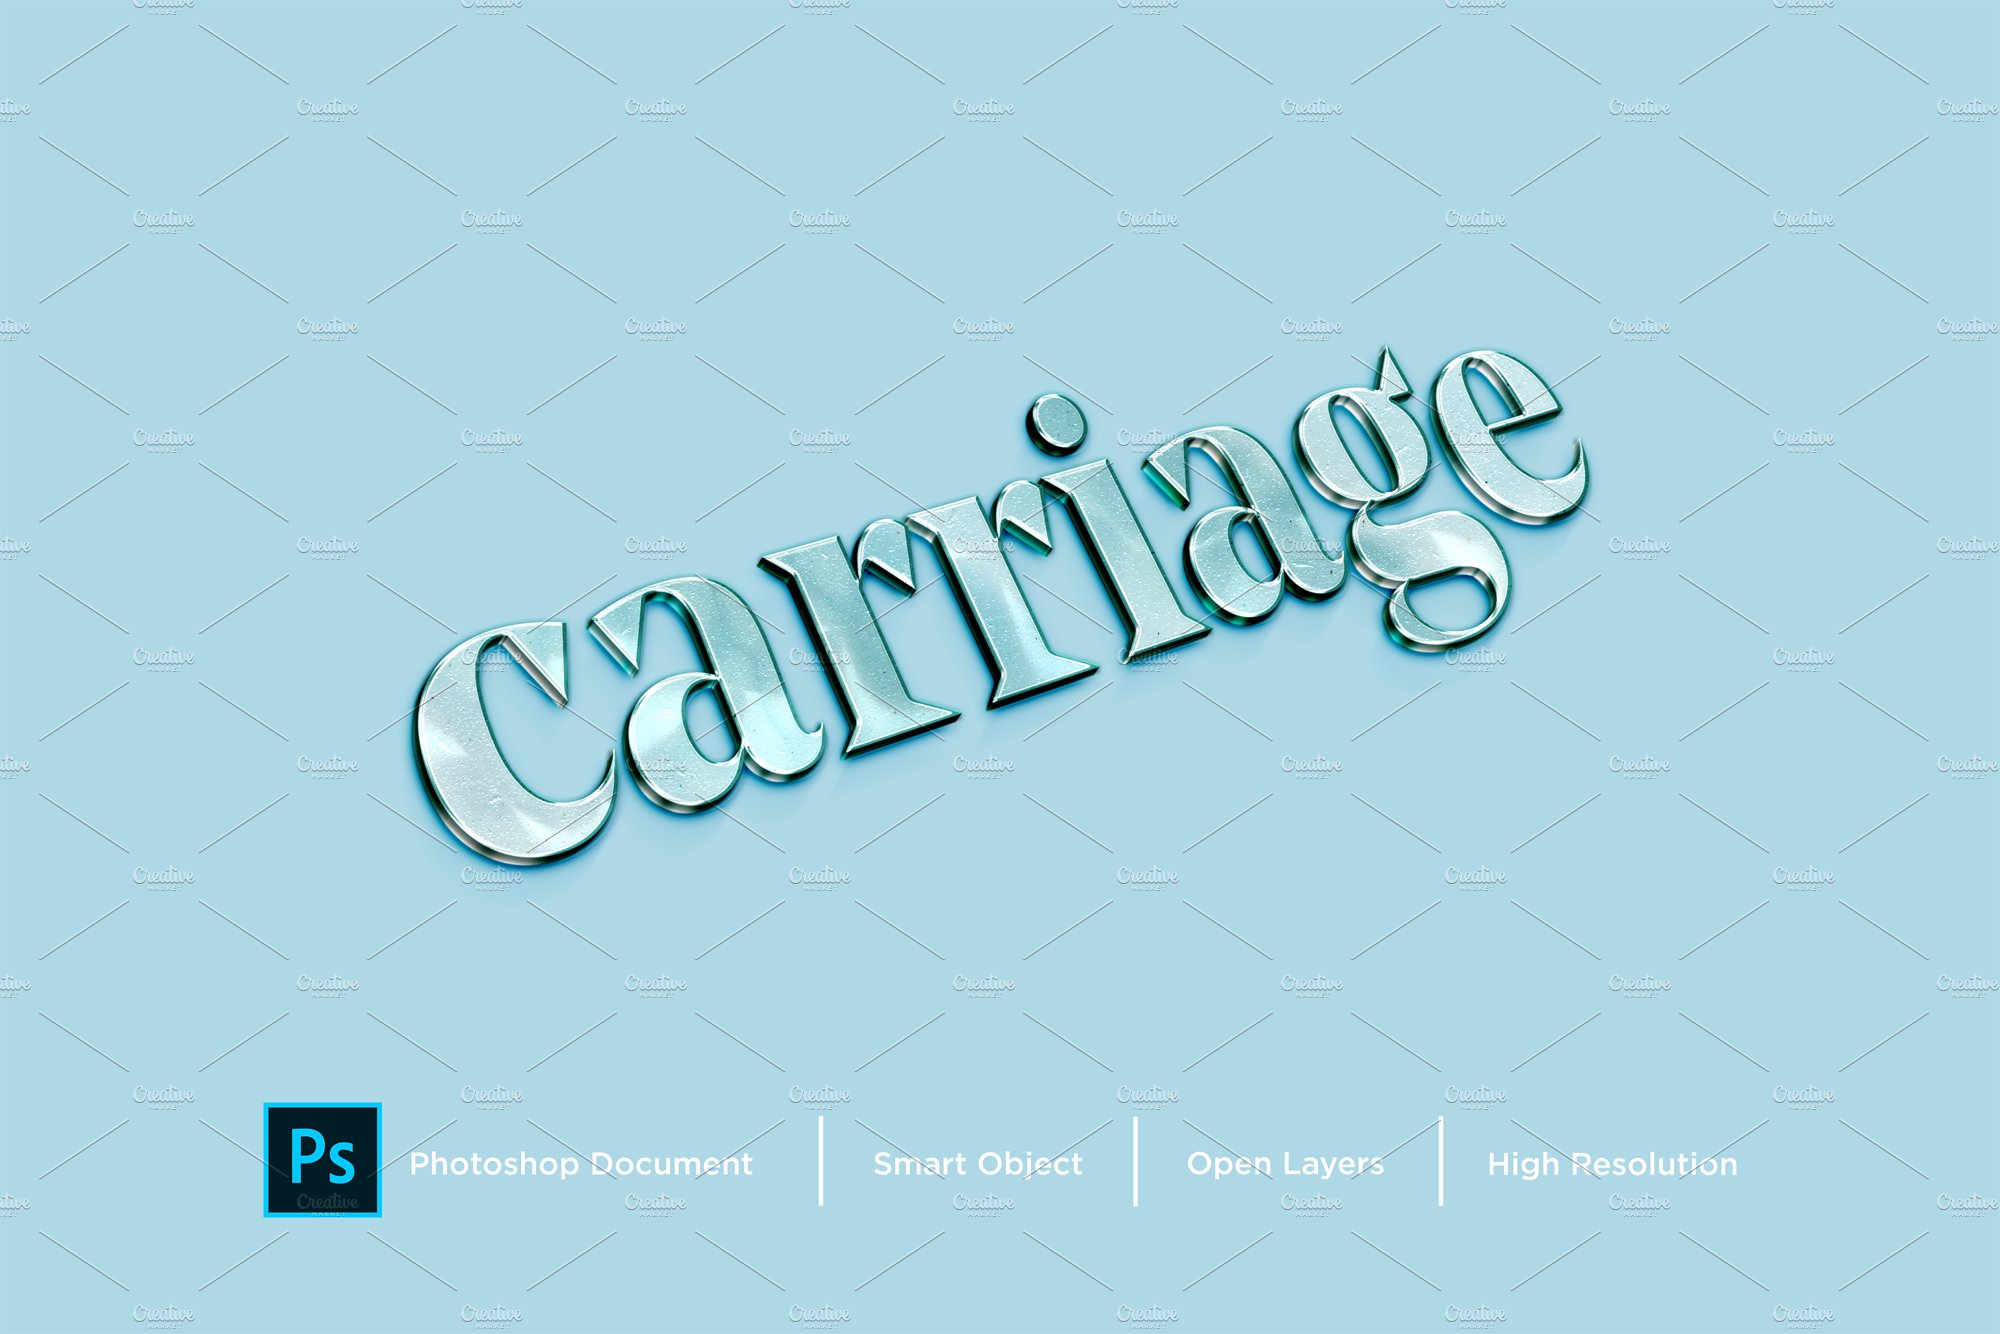 Carriage Text Effect & Layer Stylecover image.